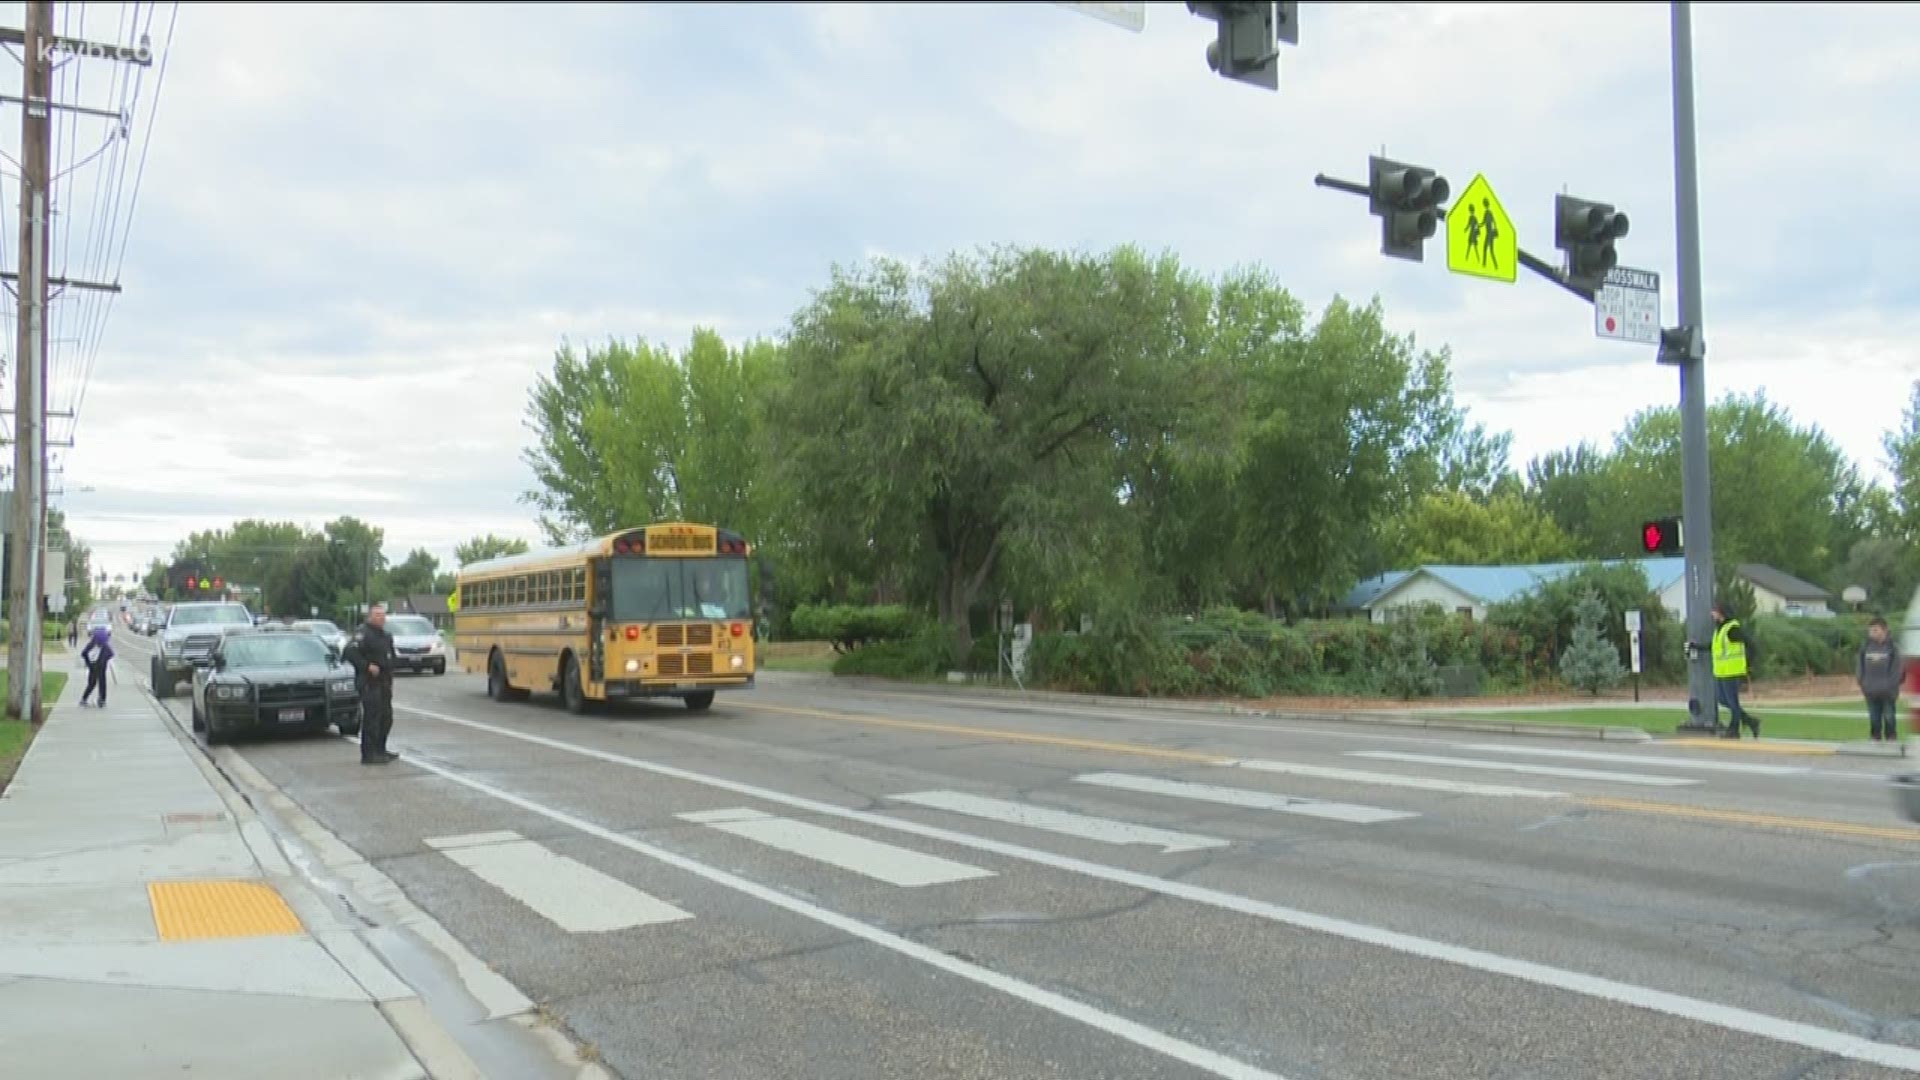 The goal is to make school zones safe for drivers and pedestrians.